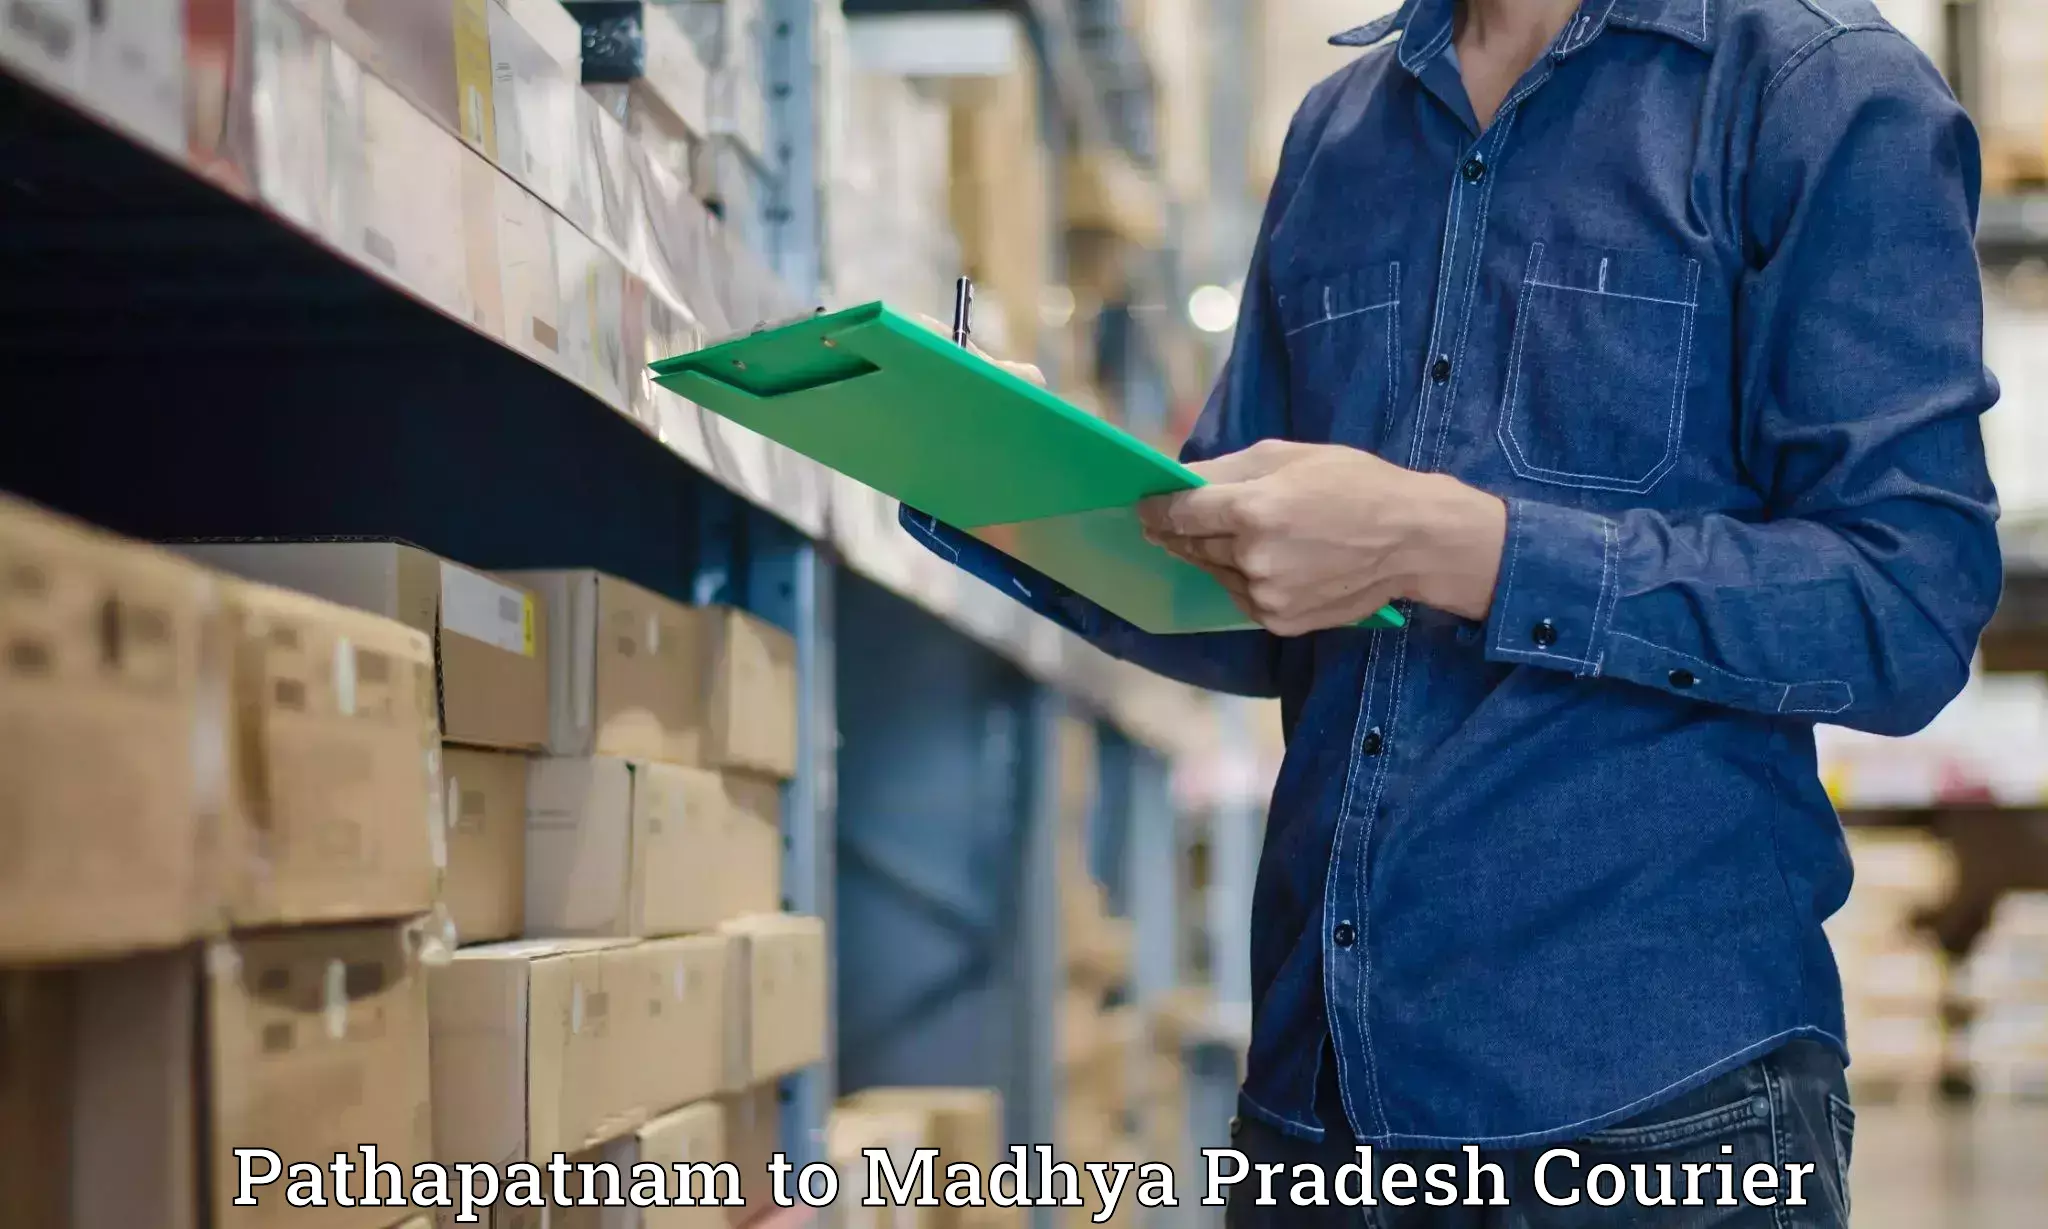 Business delivery service Pathapatnam to Alirajpur